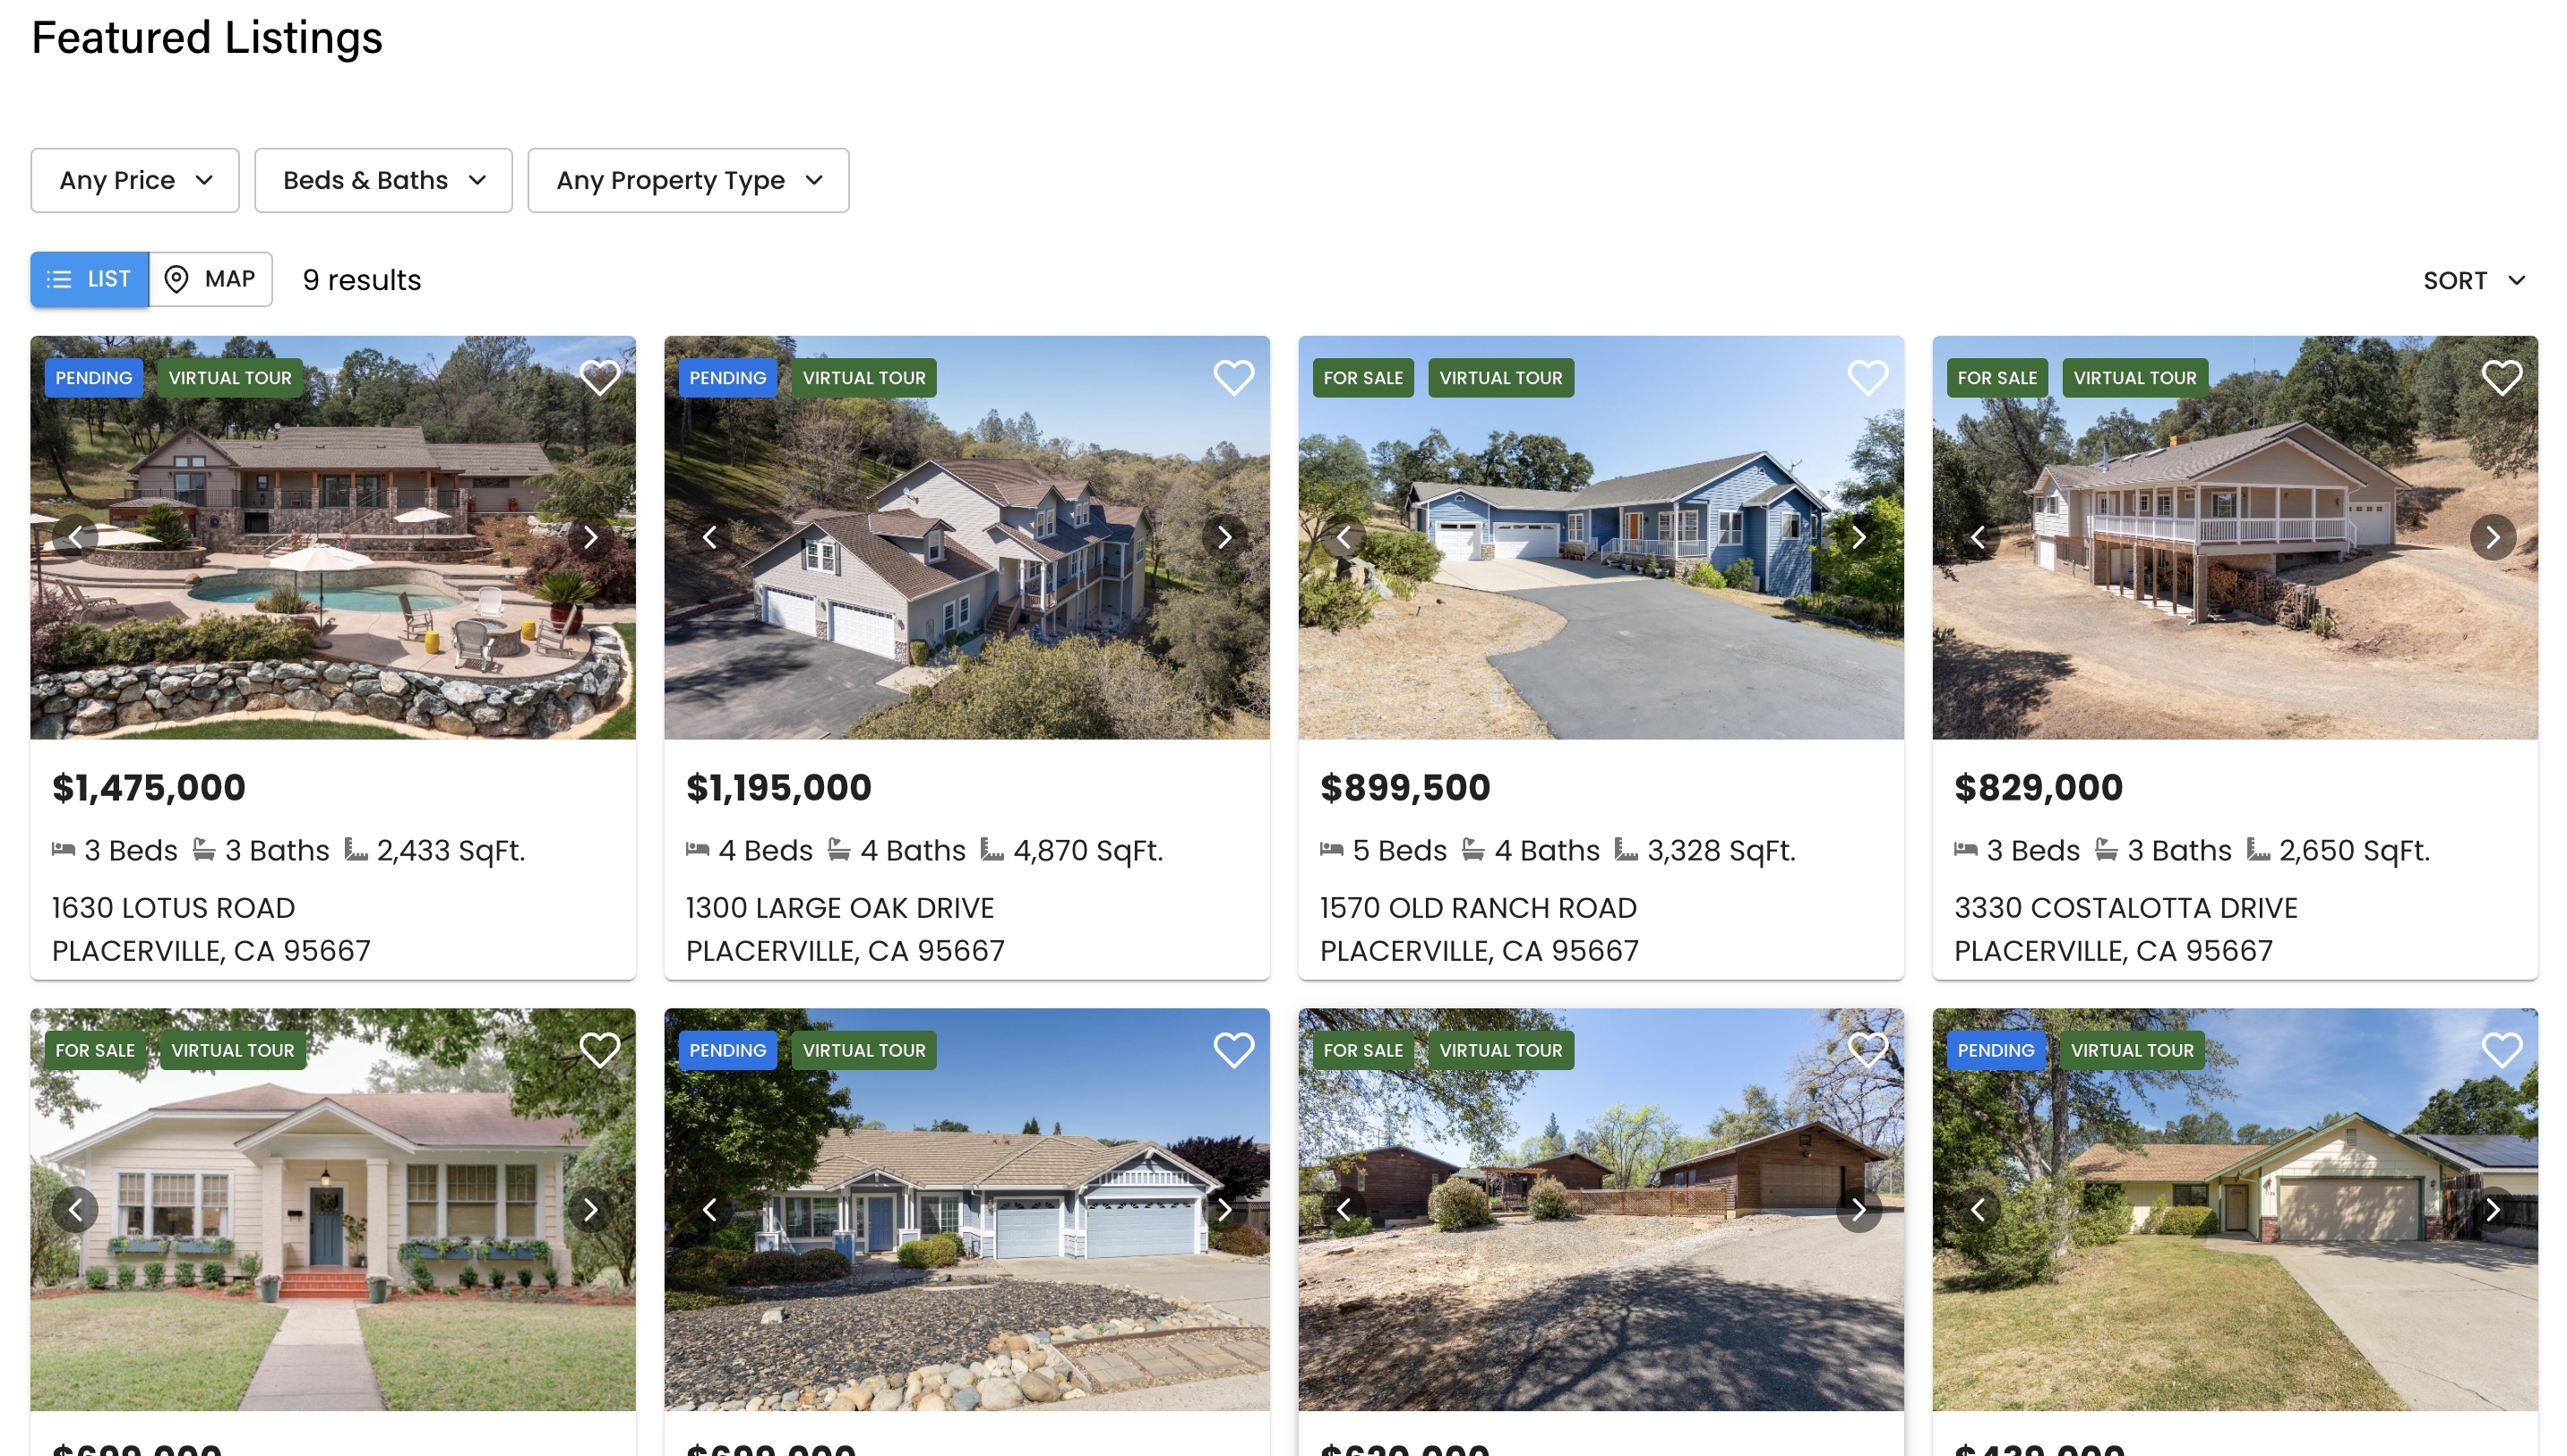 Featured listings IDX page